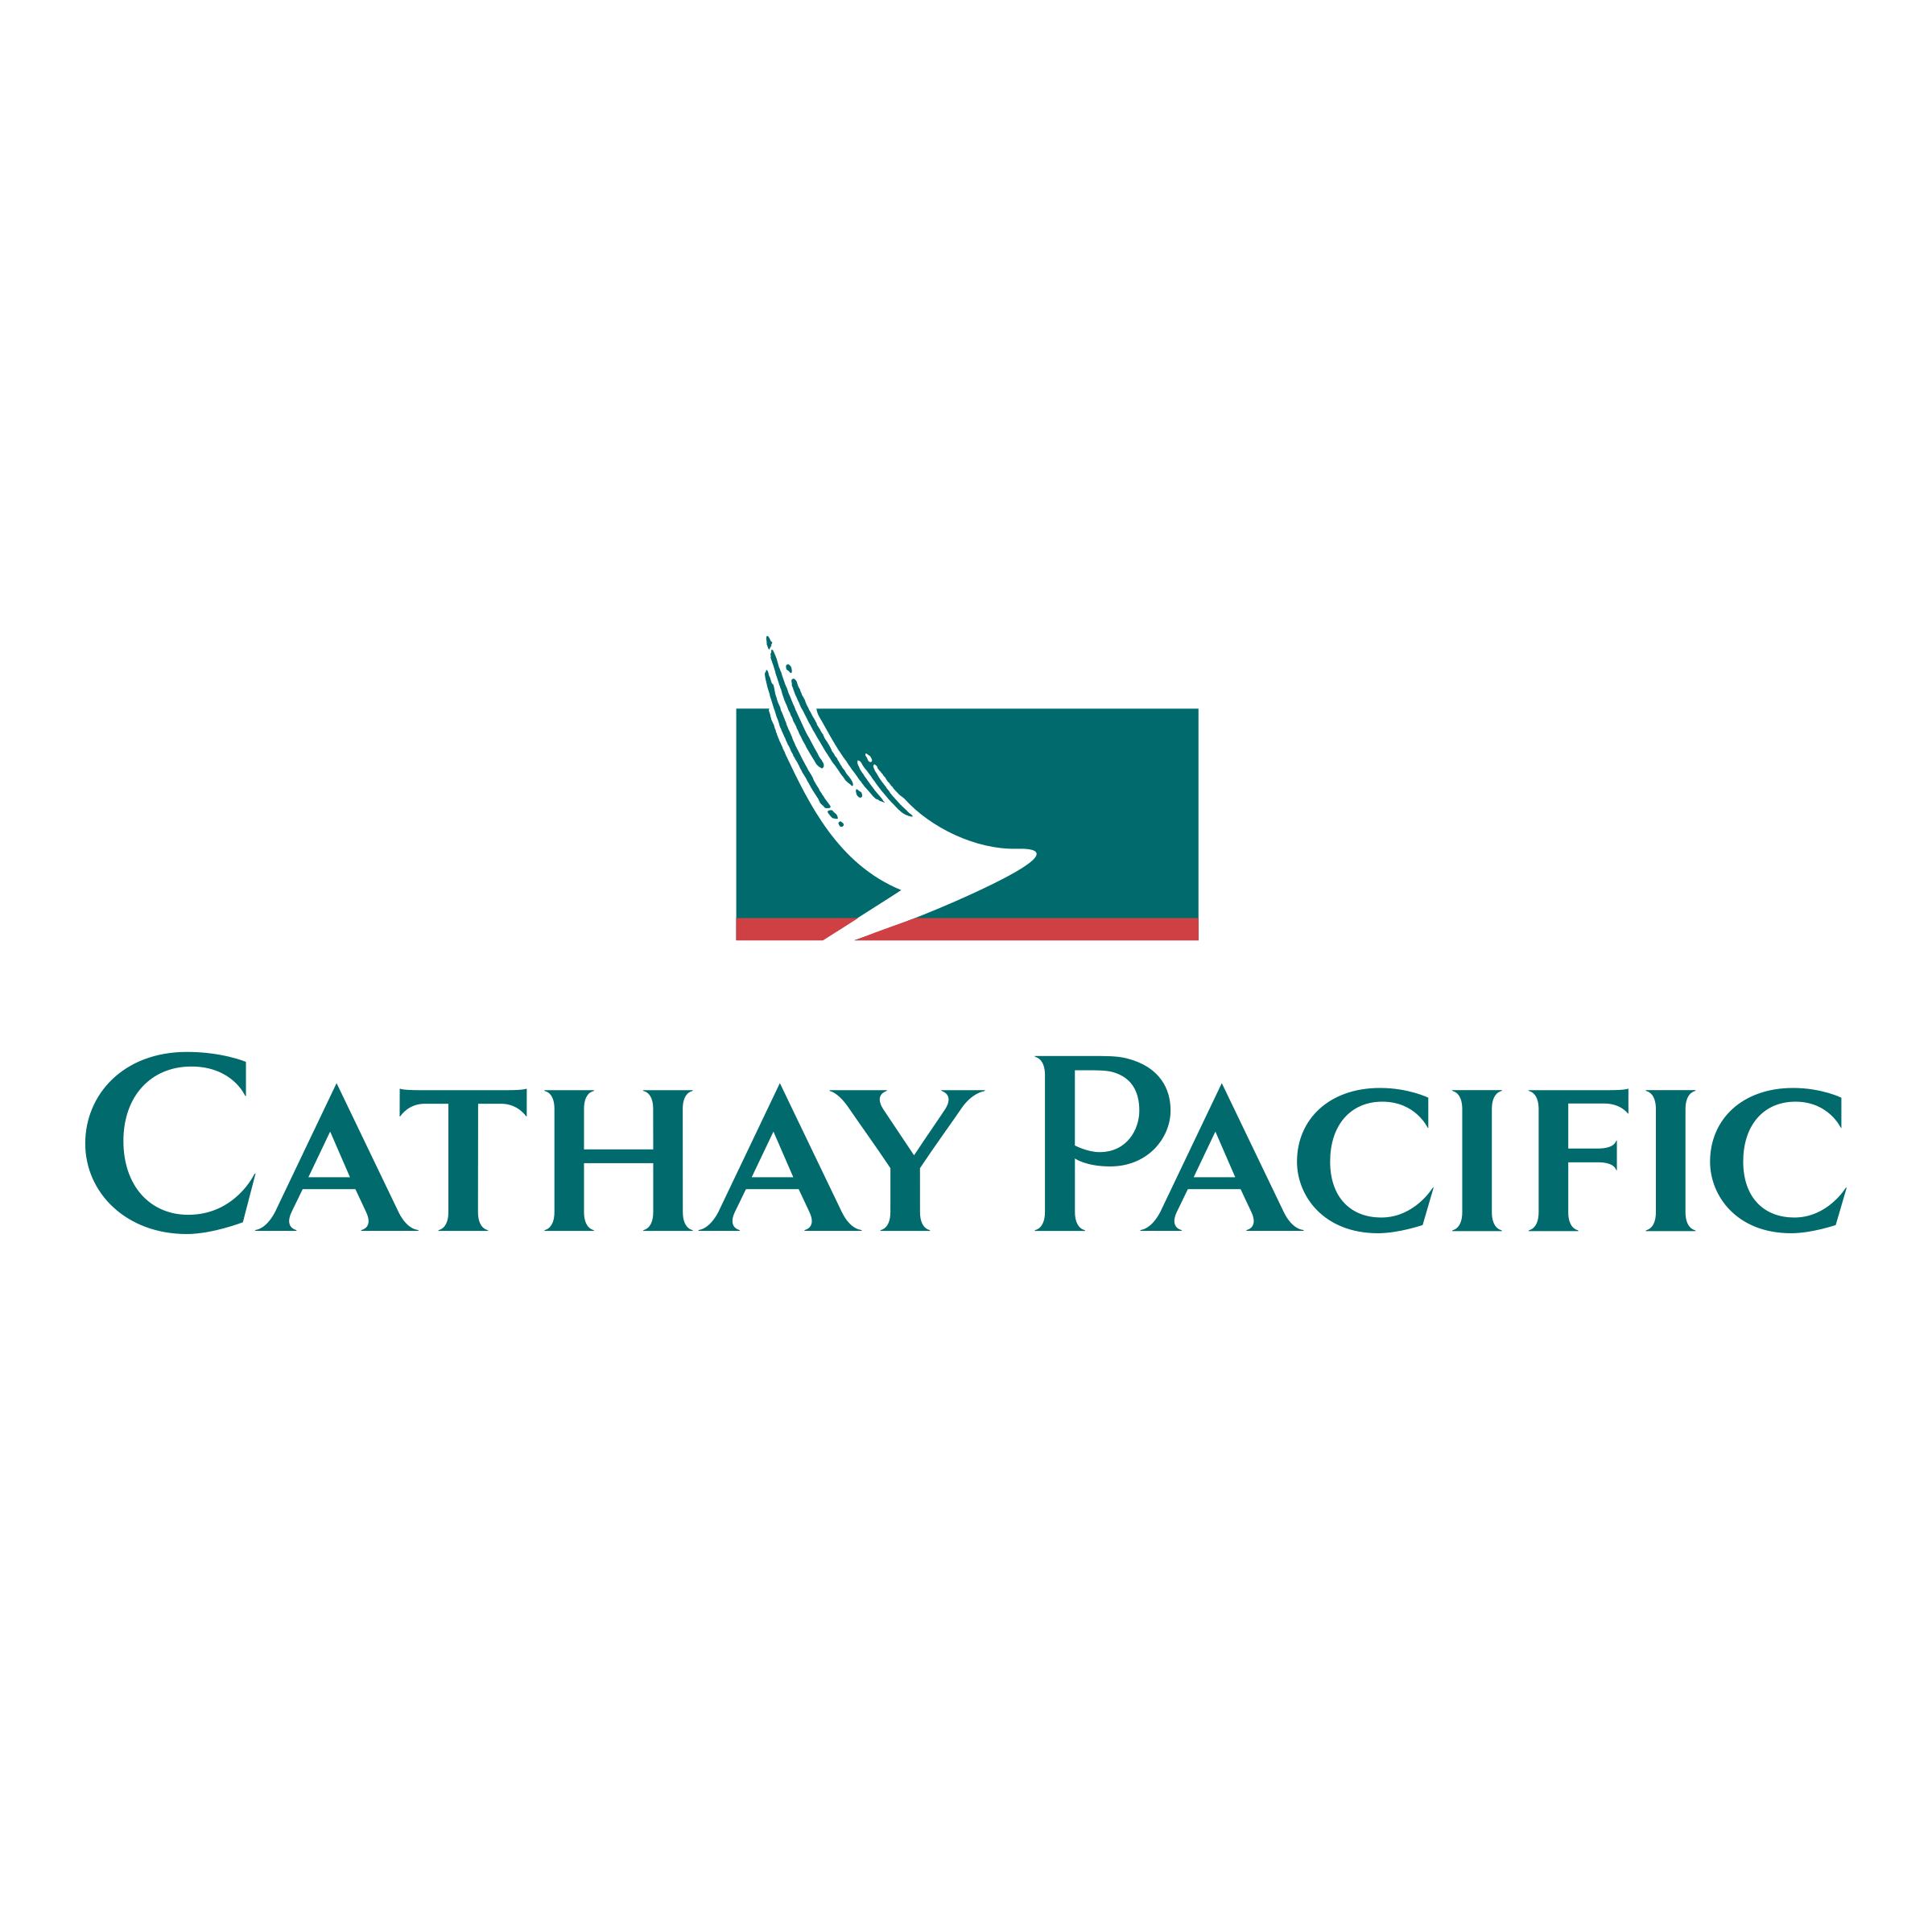 Pacific Logo - Cathay Pacific Logo PNG Transparent & SVG Vector - Freebie Supply